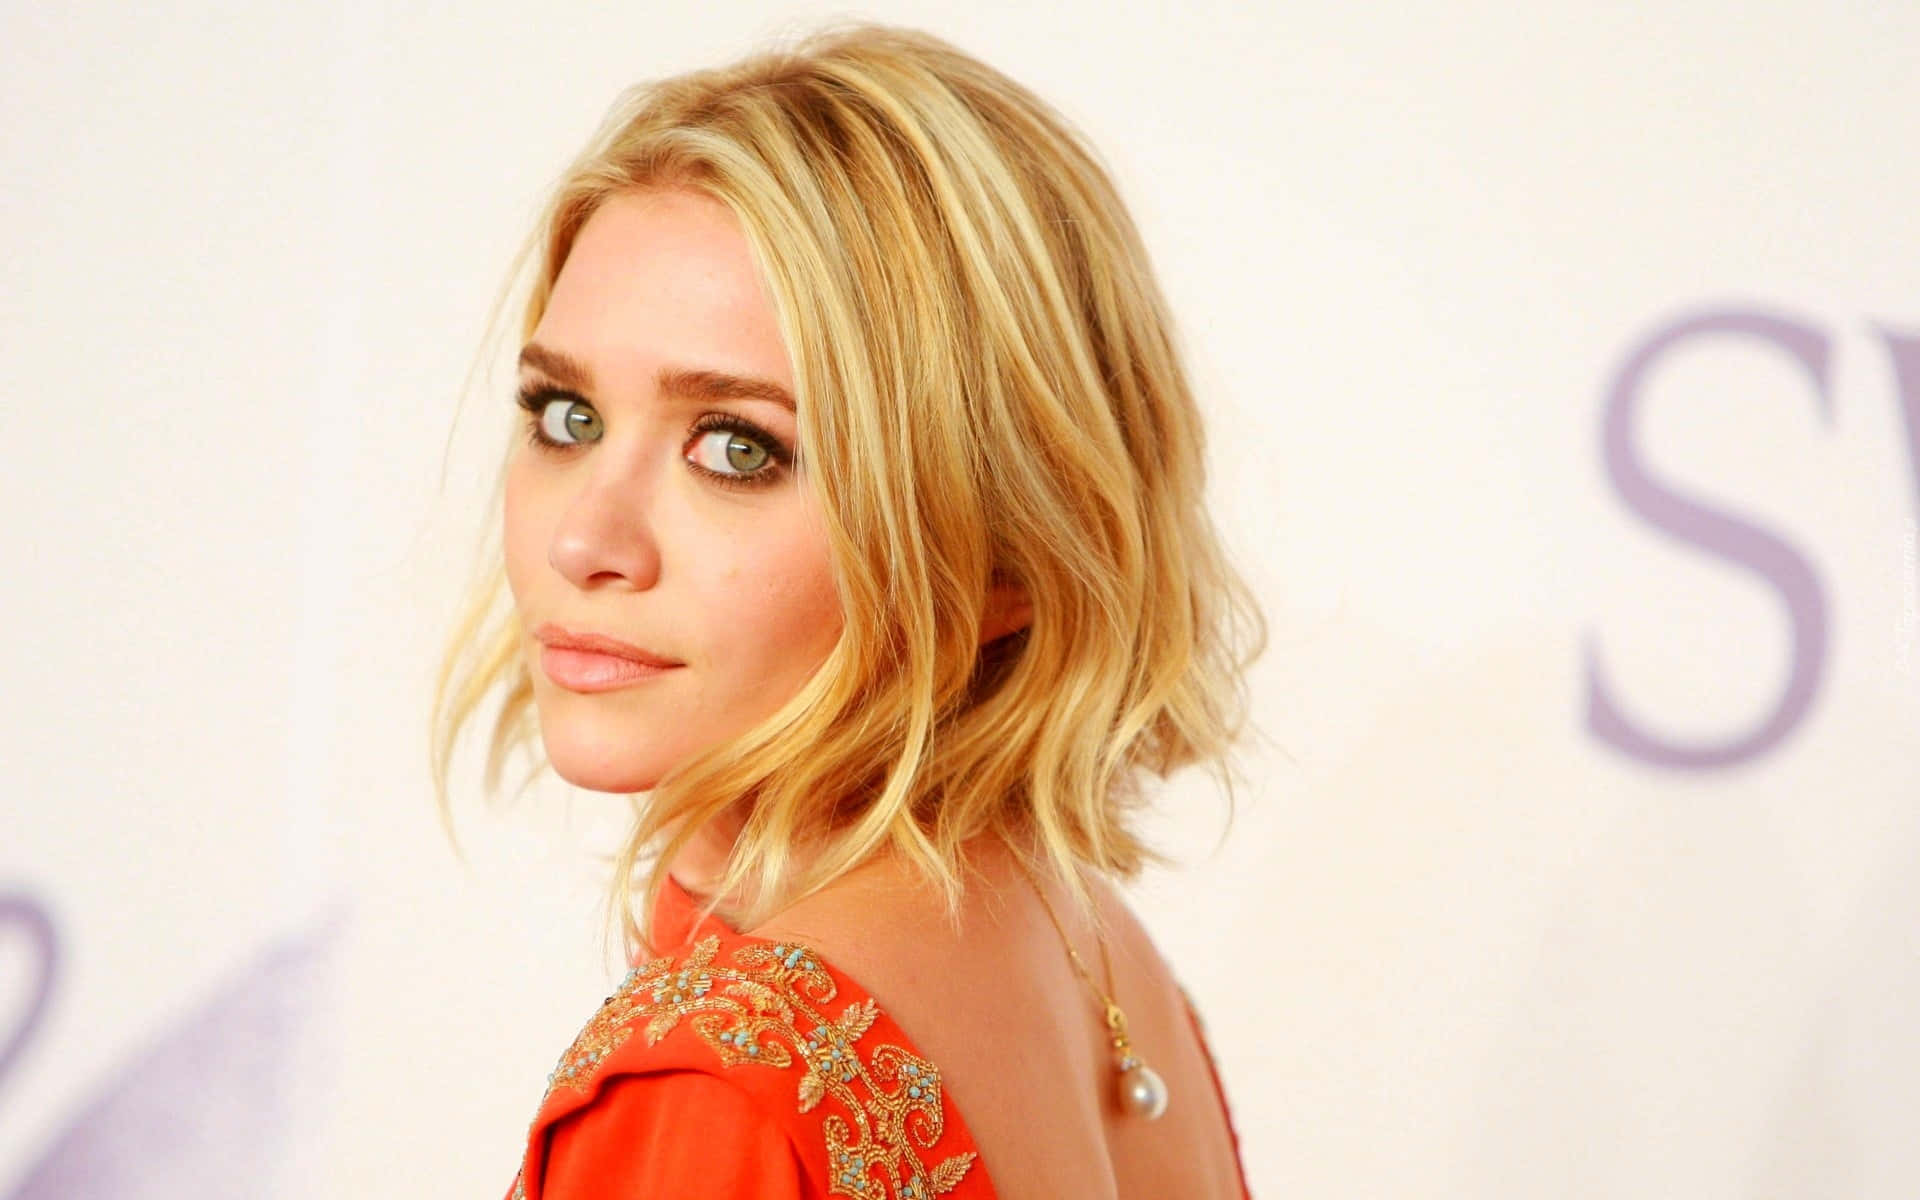 Ashley Olsen Poses Elegantly in a Stylish Outfit Wallpaper